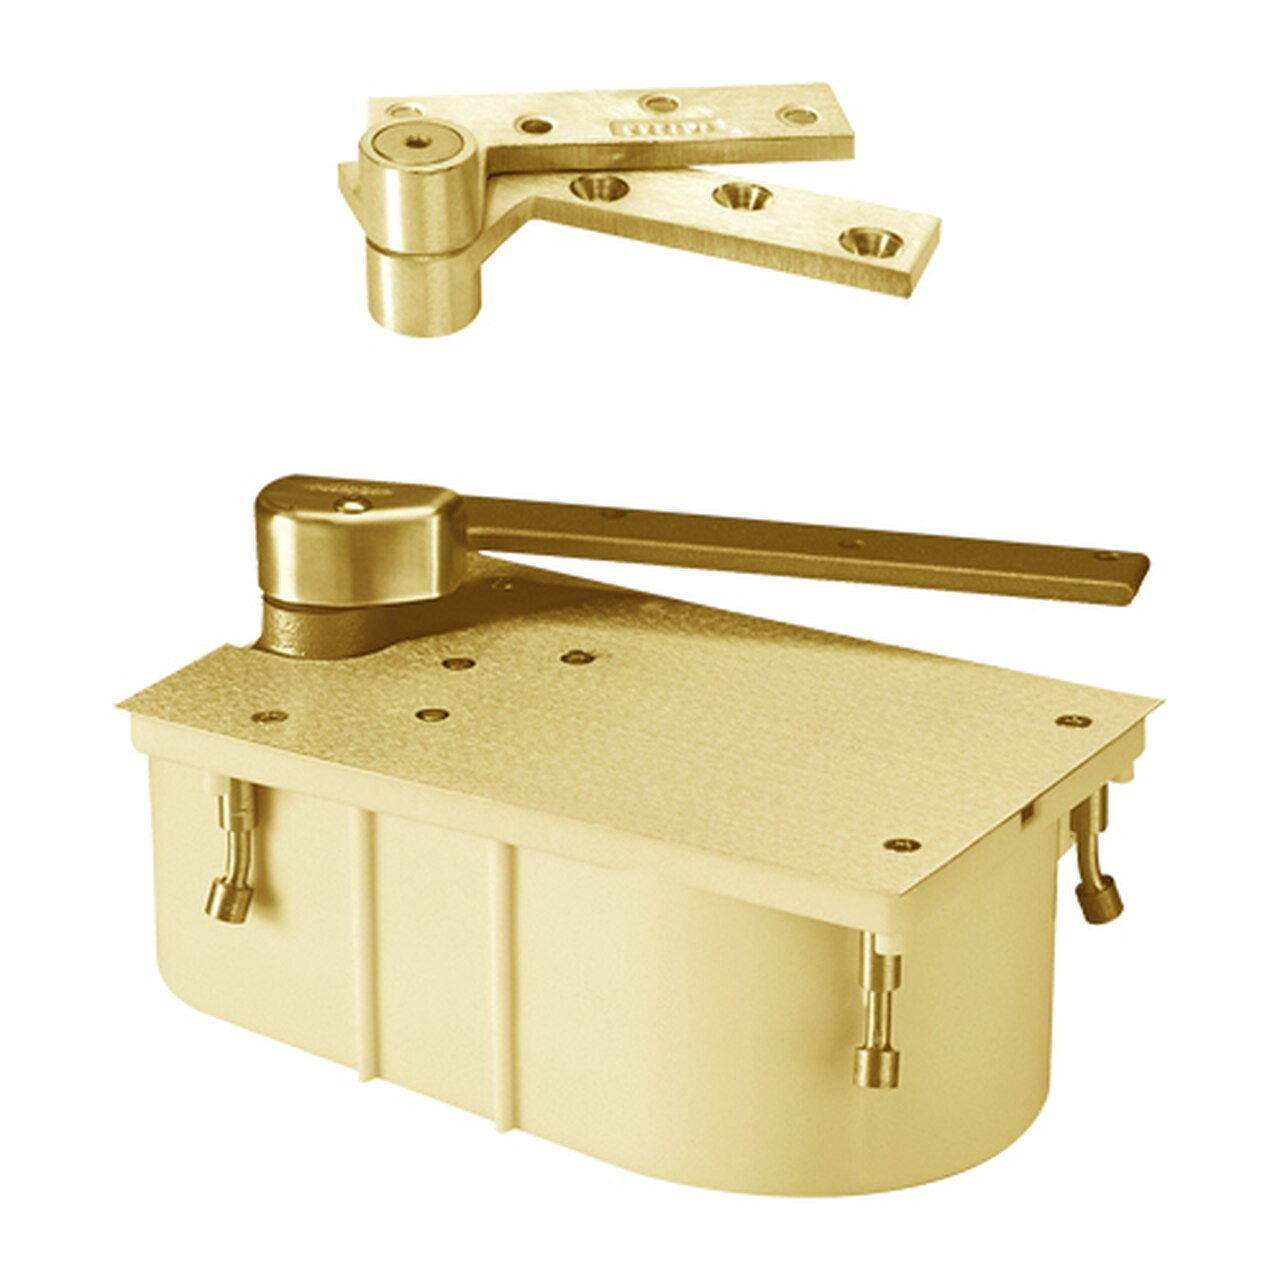 F27-95N-CWF-RH-605 Rixson 27 Series Fire Rated Heavy Duty 3/4" Offset Hung Floor Closer in Bright Brass Finish